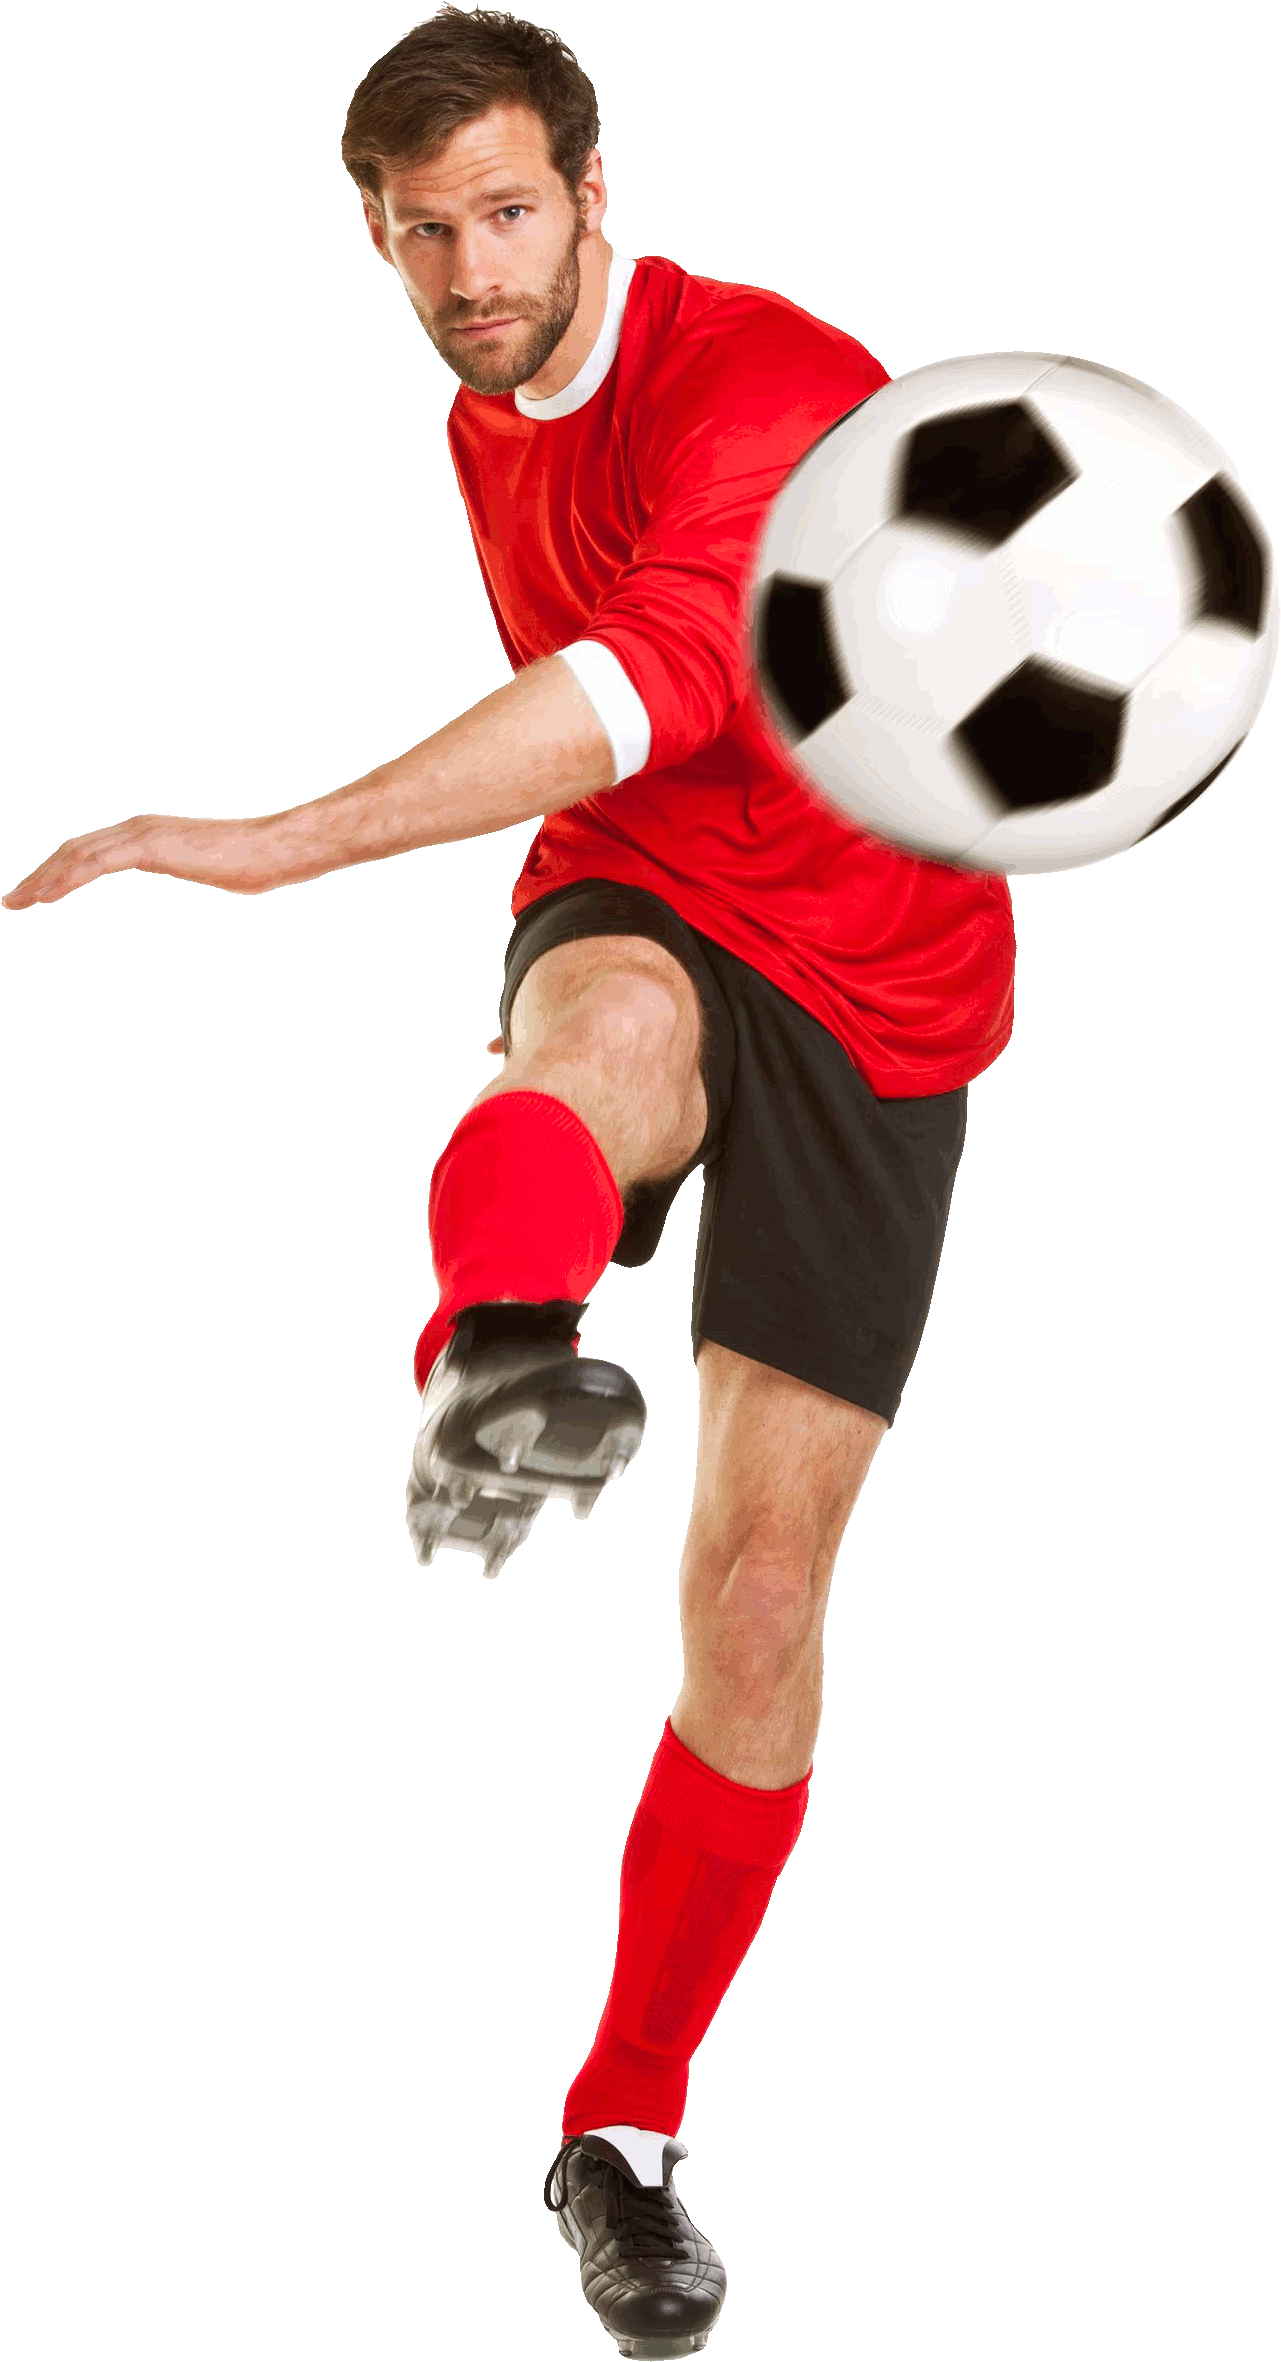 Download News - Soccer Player Hitting A Ball PNG Image with No ...